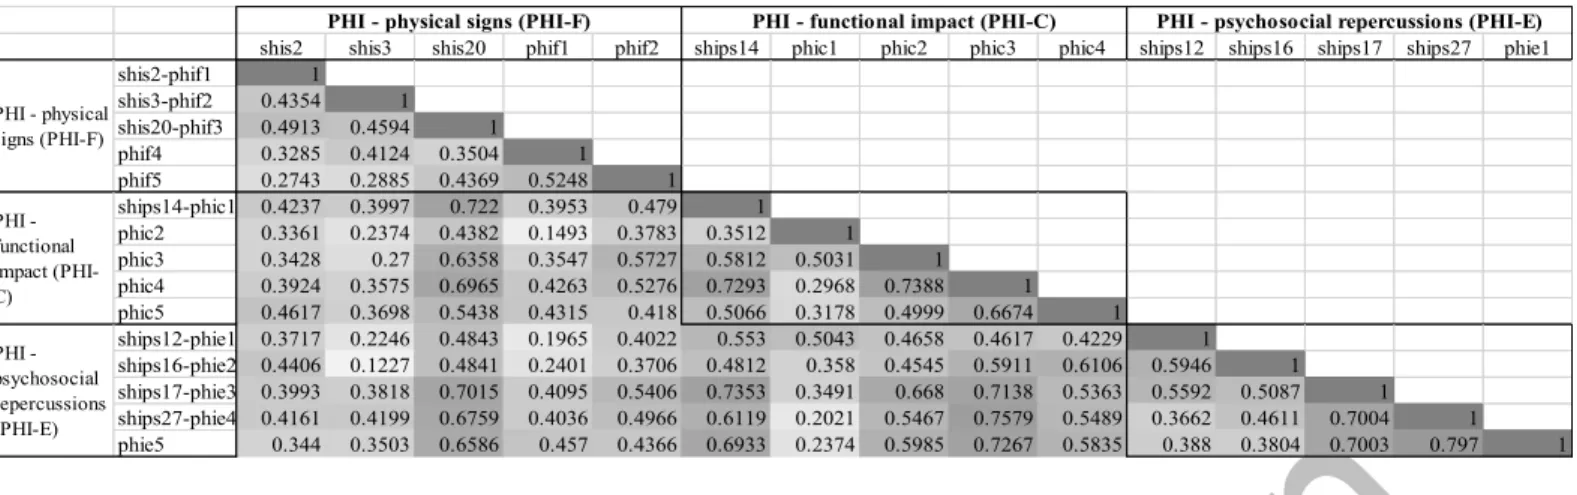 Table 3: results of the confirmatory principal component analysis of PHI items 